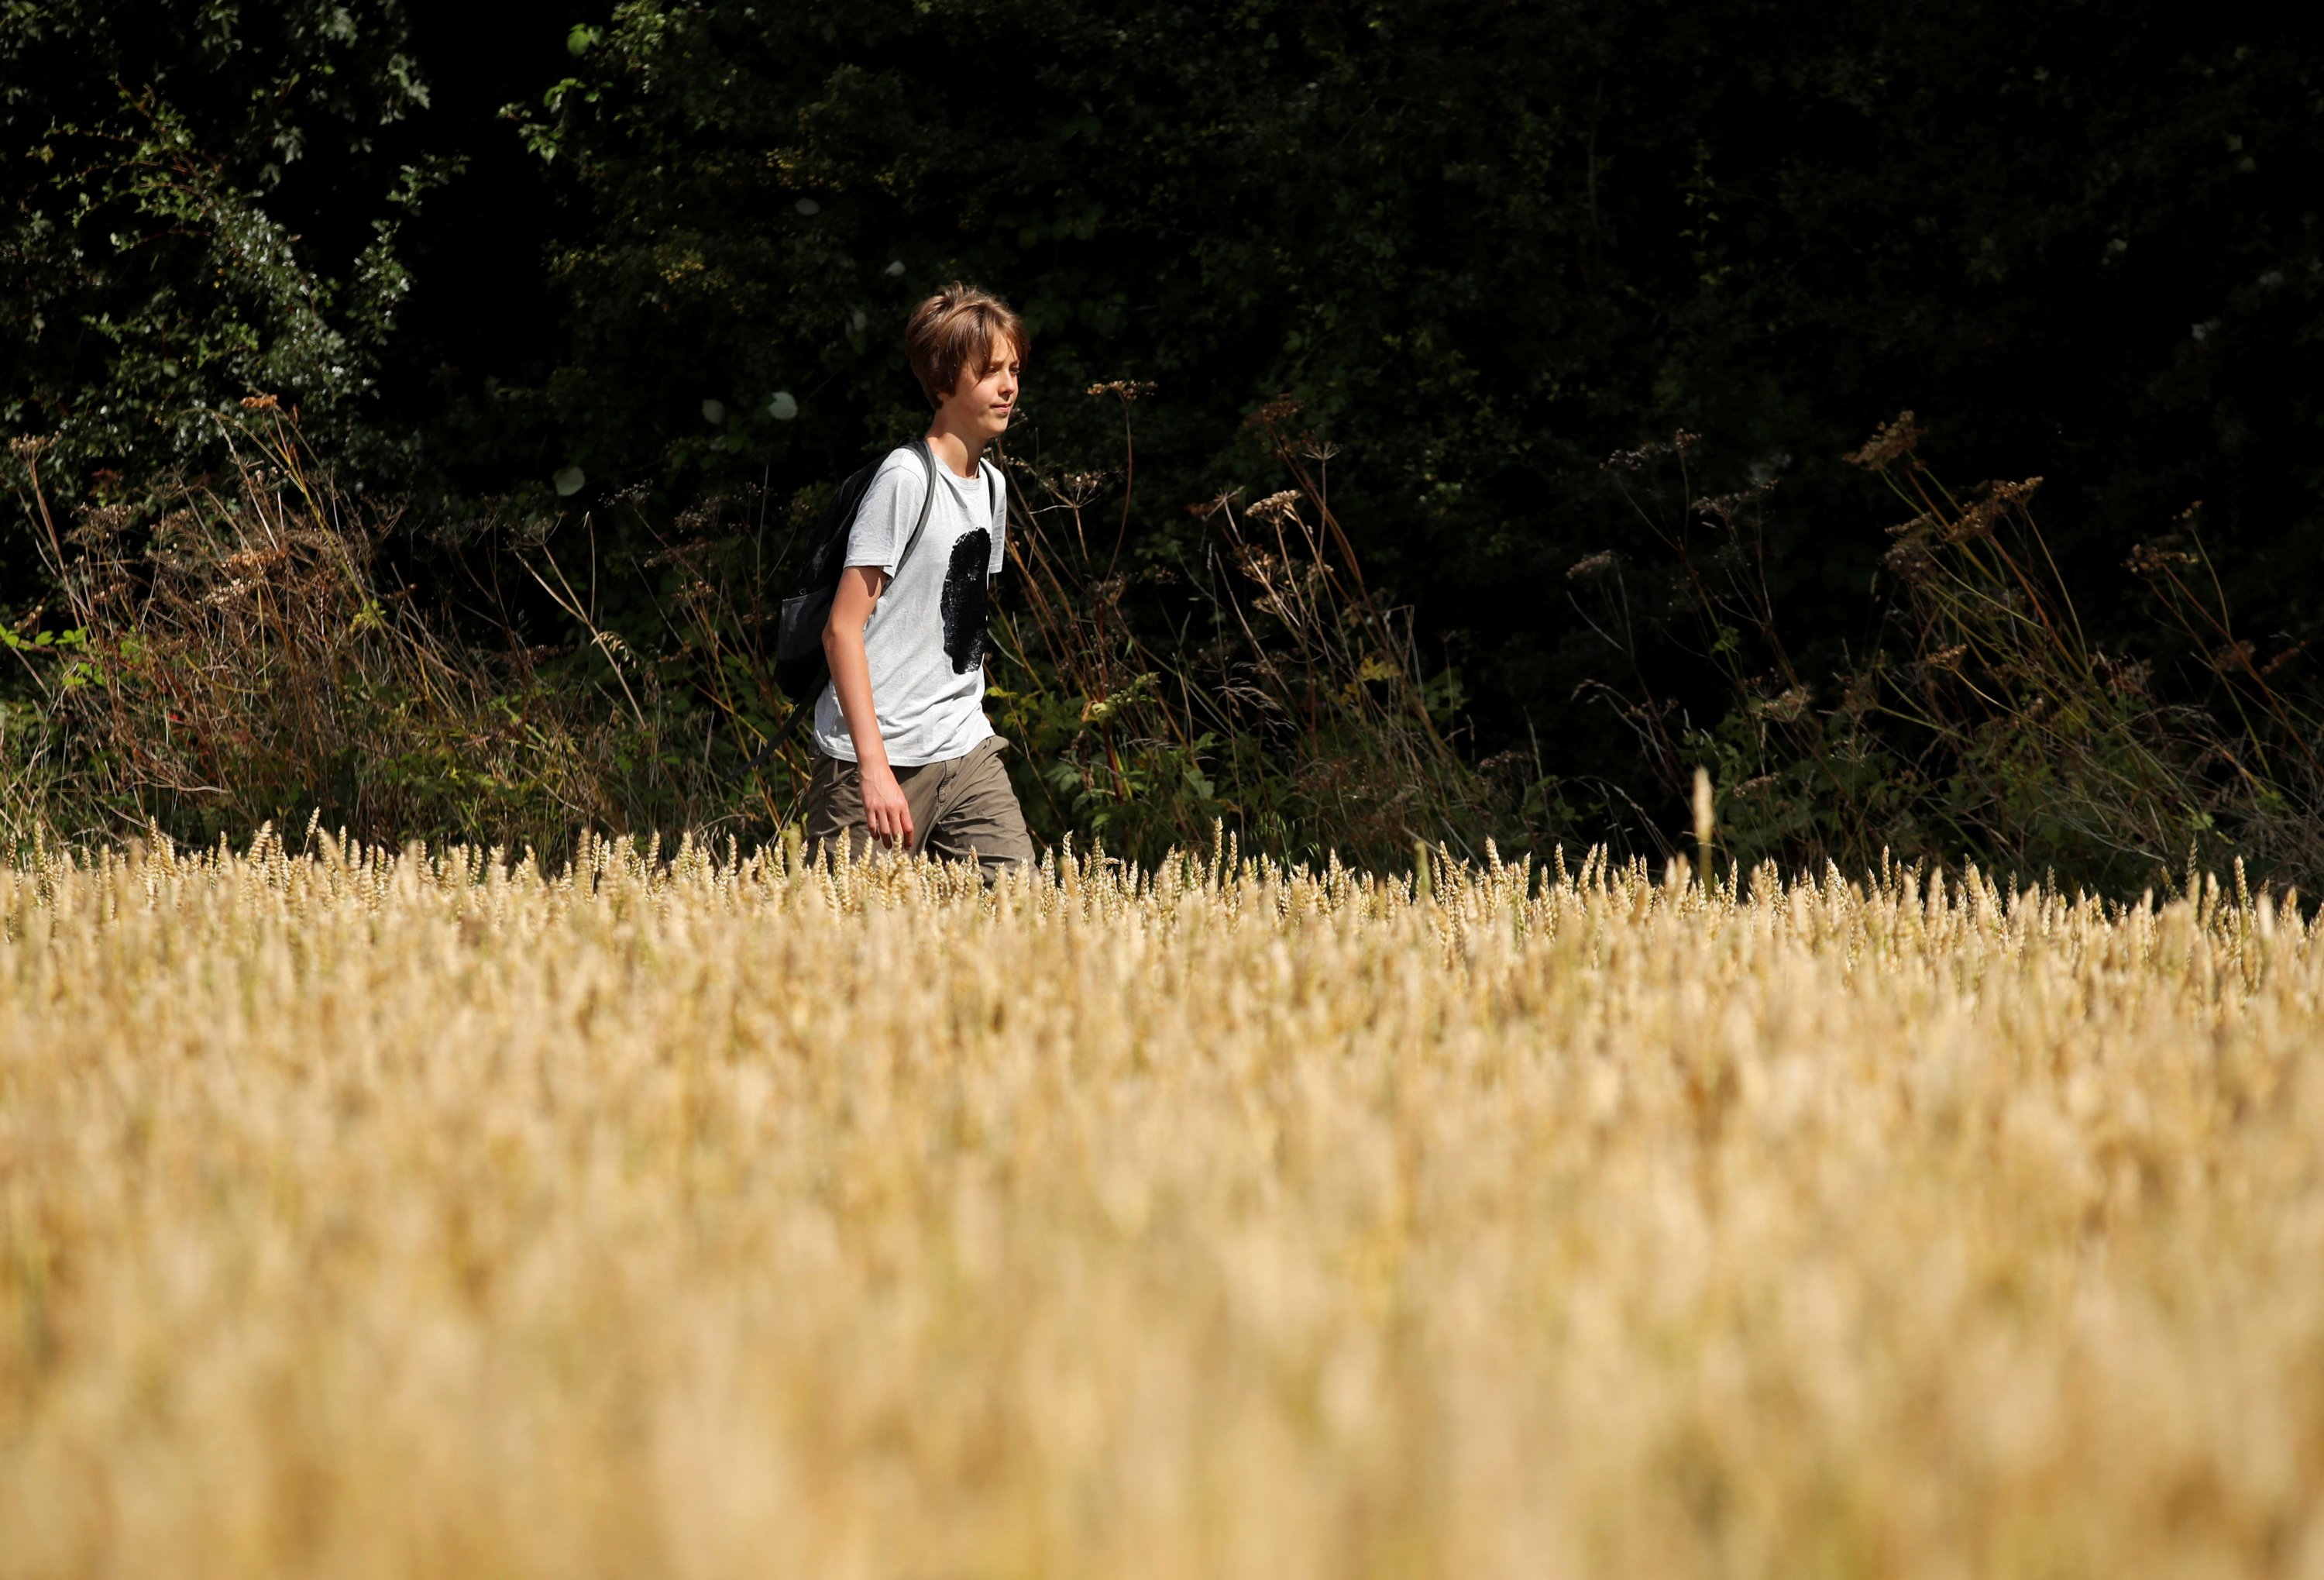 Jude Walker, 11, during his 210-mile (340-km) walk from Yorkshire to London over 21 days to raise awareness for "the zero carbon campaign" petition, which calls for the government to implement a carbon tax, in Milton Keynes, Britain, Aug. 10, 2021. (REUTERS/Andrew Couldridge)